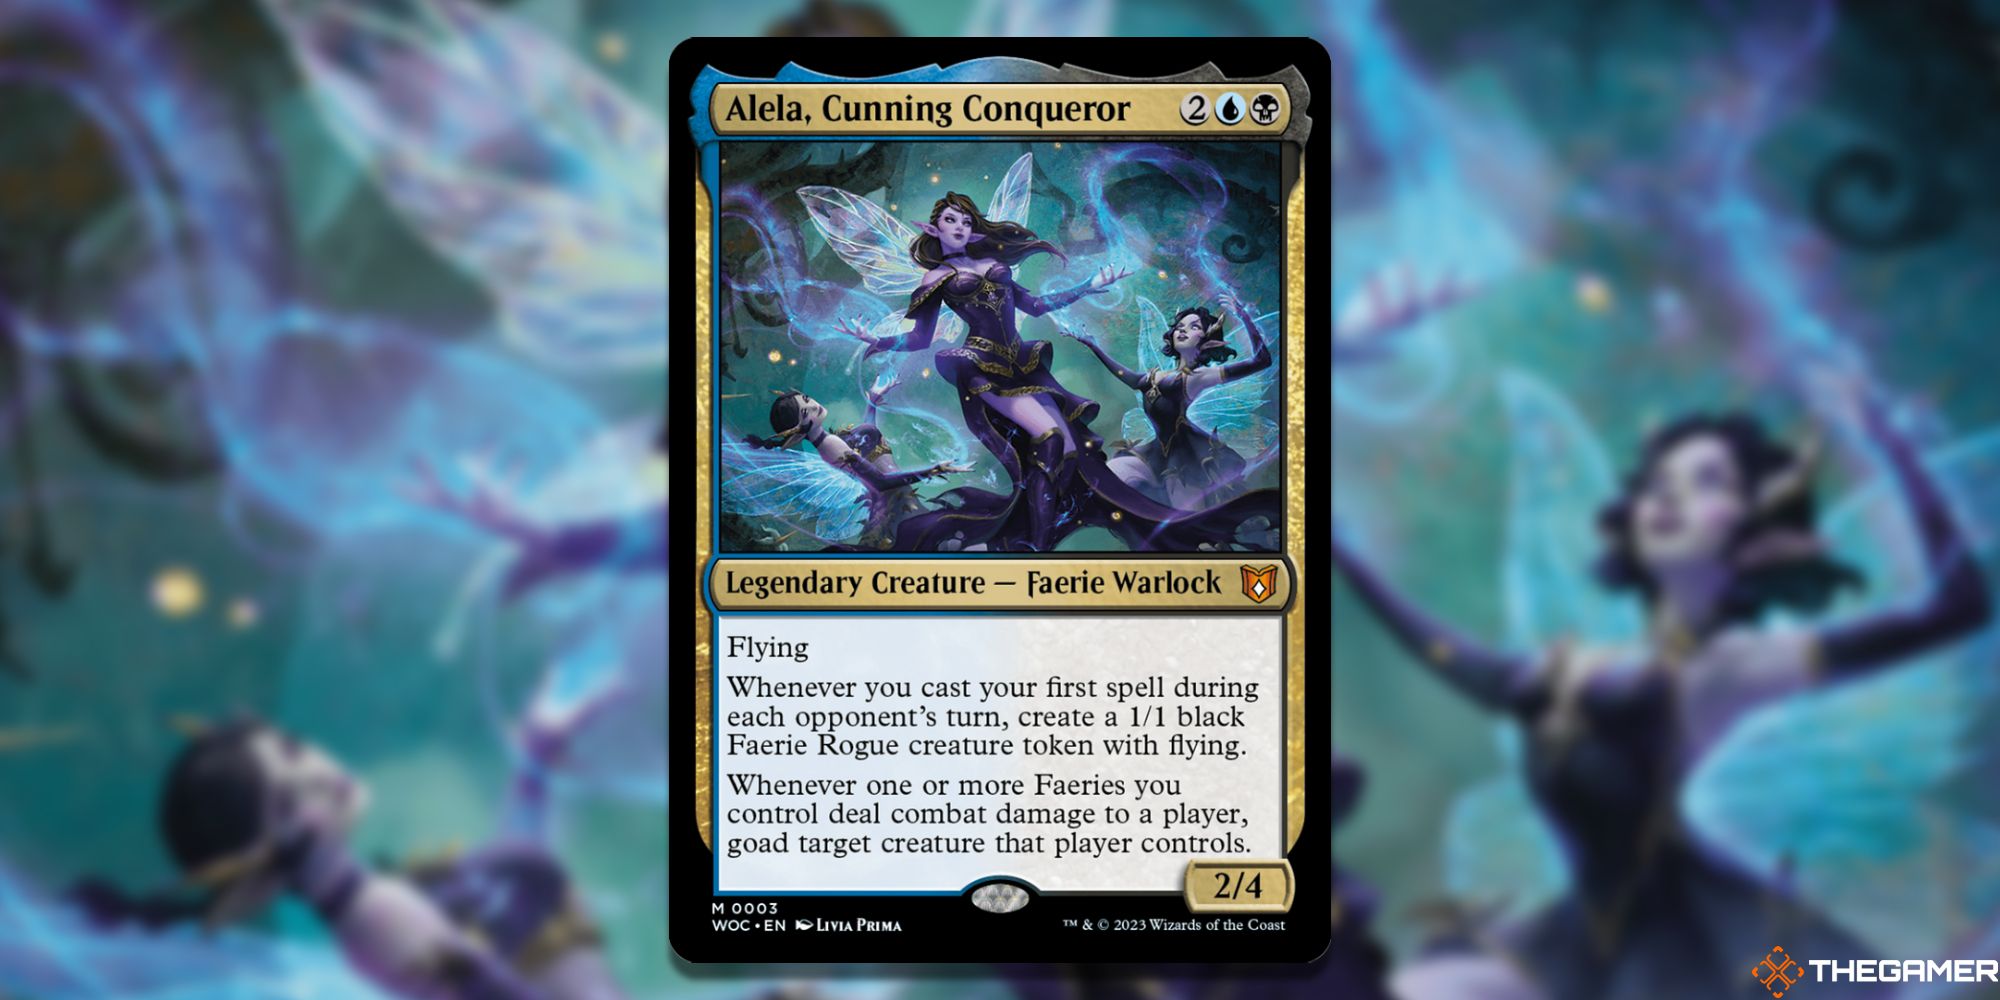 Image of the Alela, Cunning Conqueror card in Magic: The Gathering, with art by Livia Prima